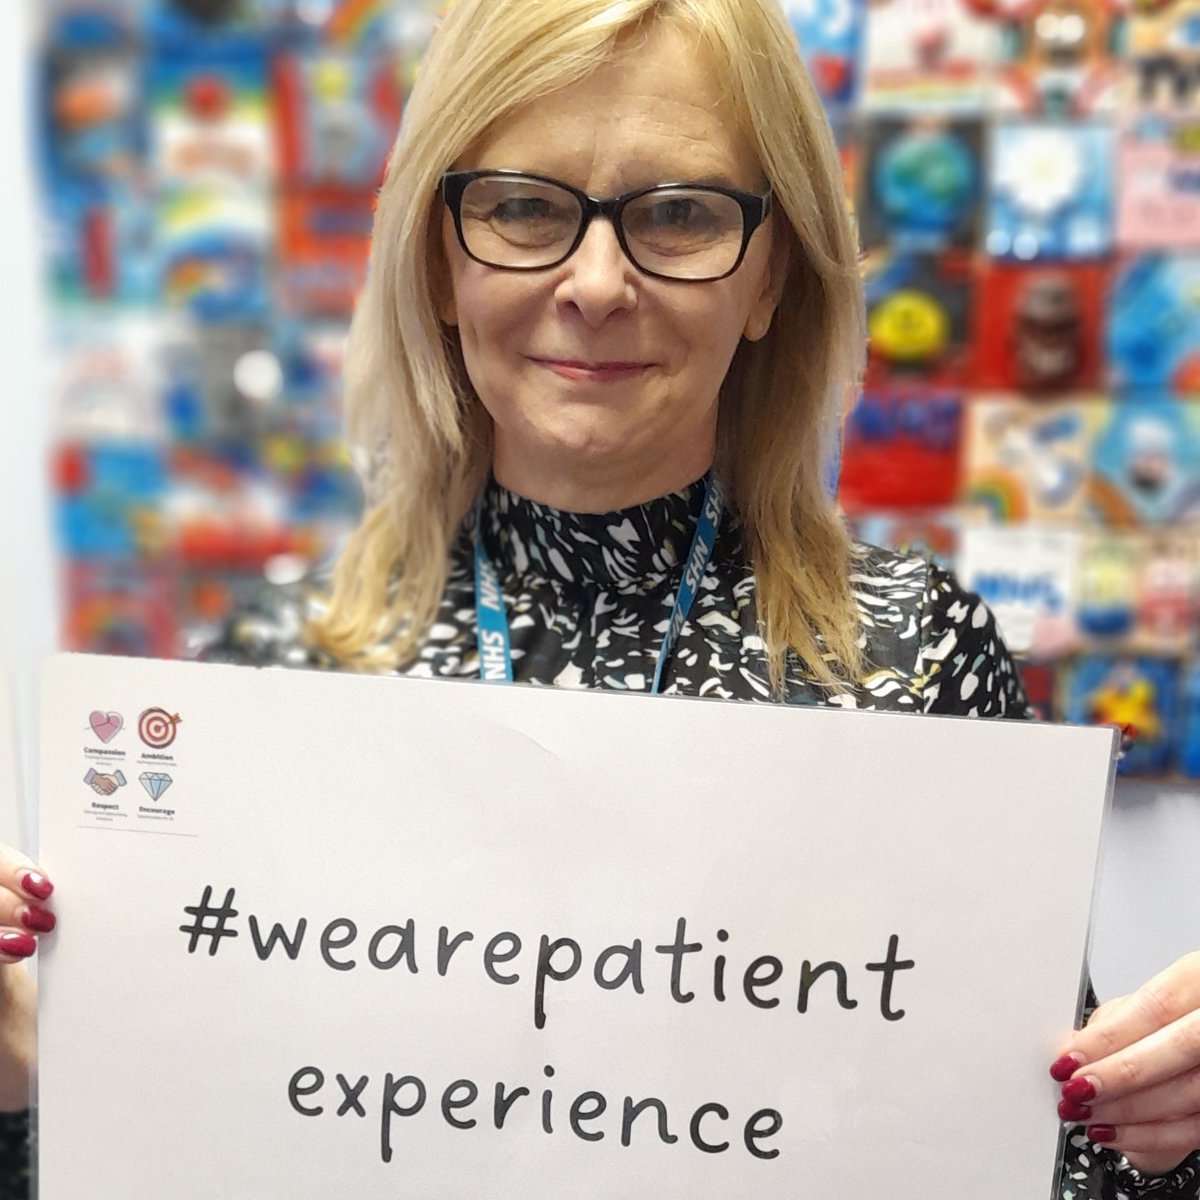 Meet Karen.
Karen works in the communication department here at Chesterfield Royal Hospital. 

Communications do an array of things here at the trust. Karen supports patient experience.

#wearepatientexperience

@royalhospital